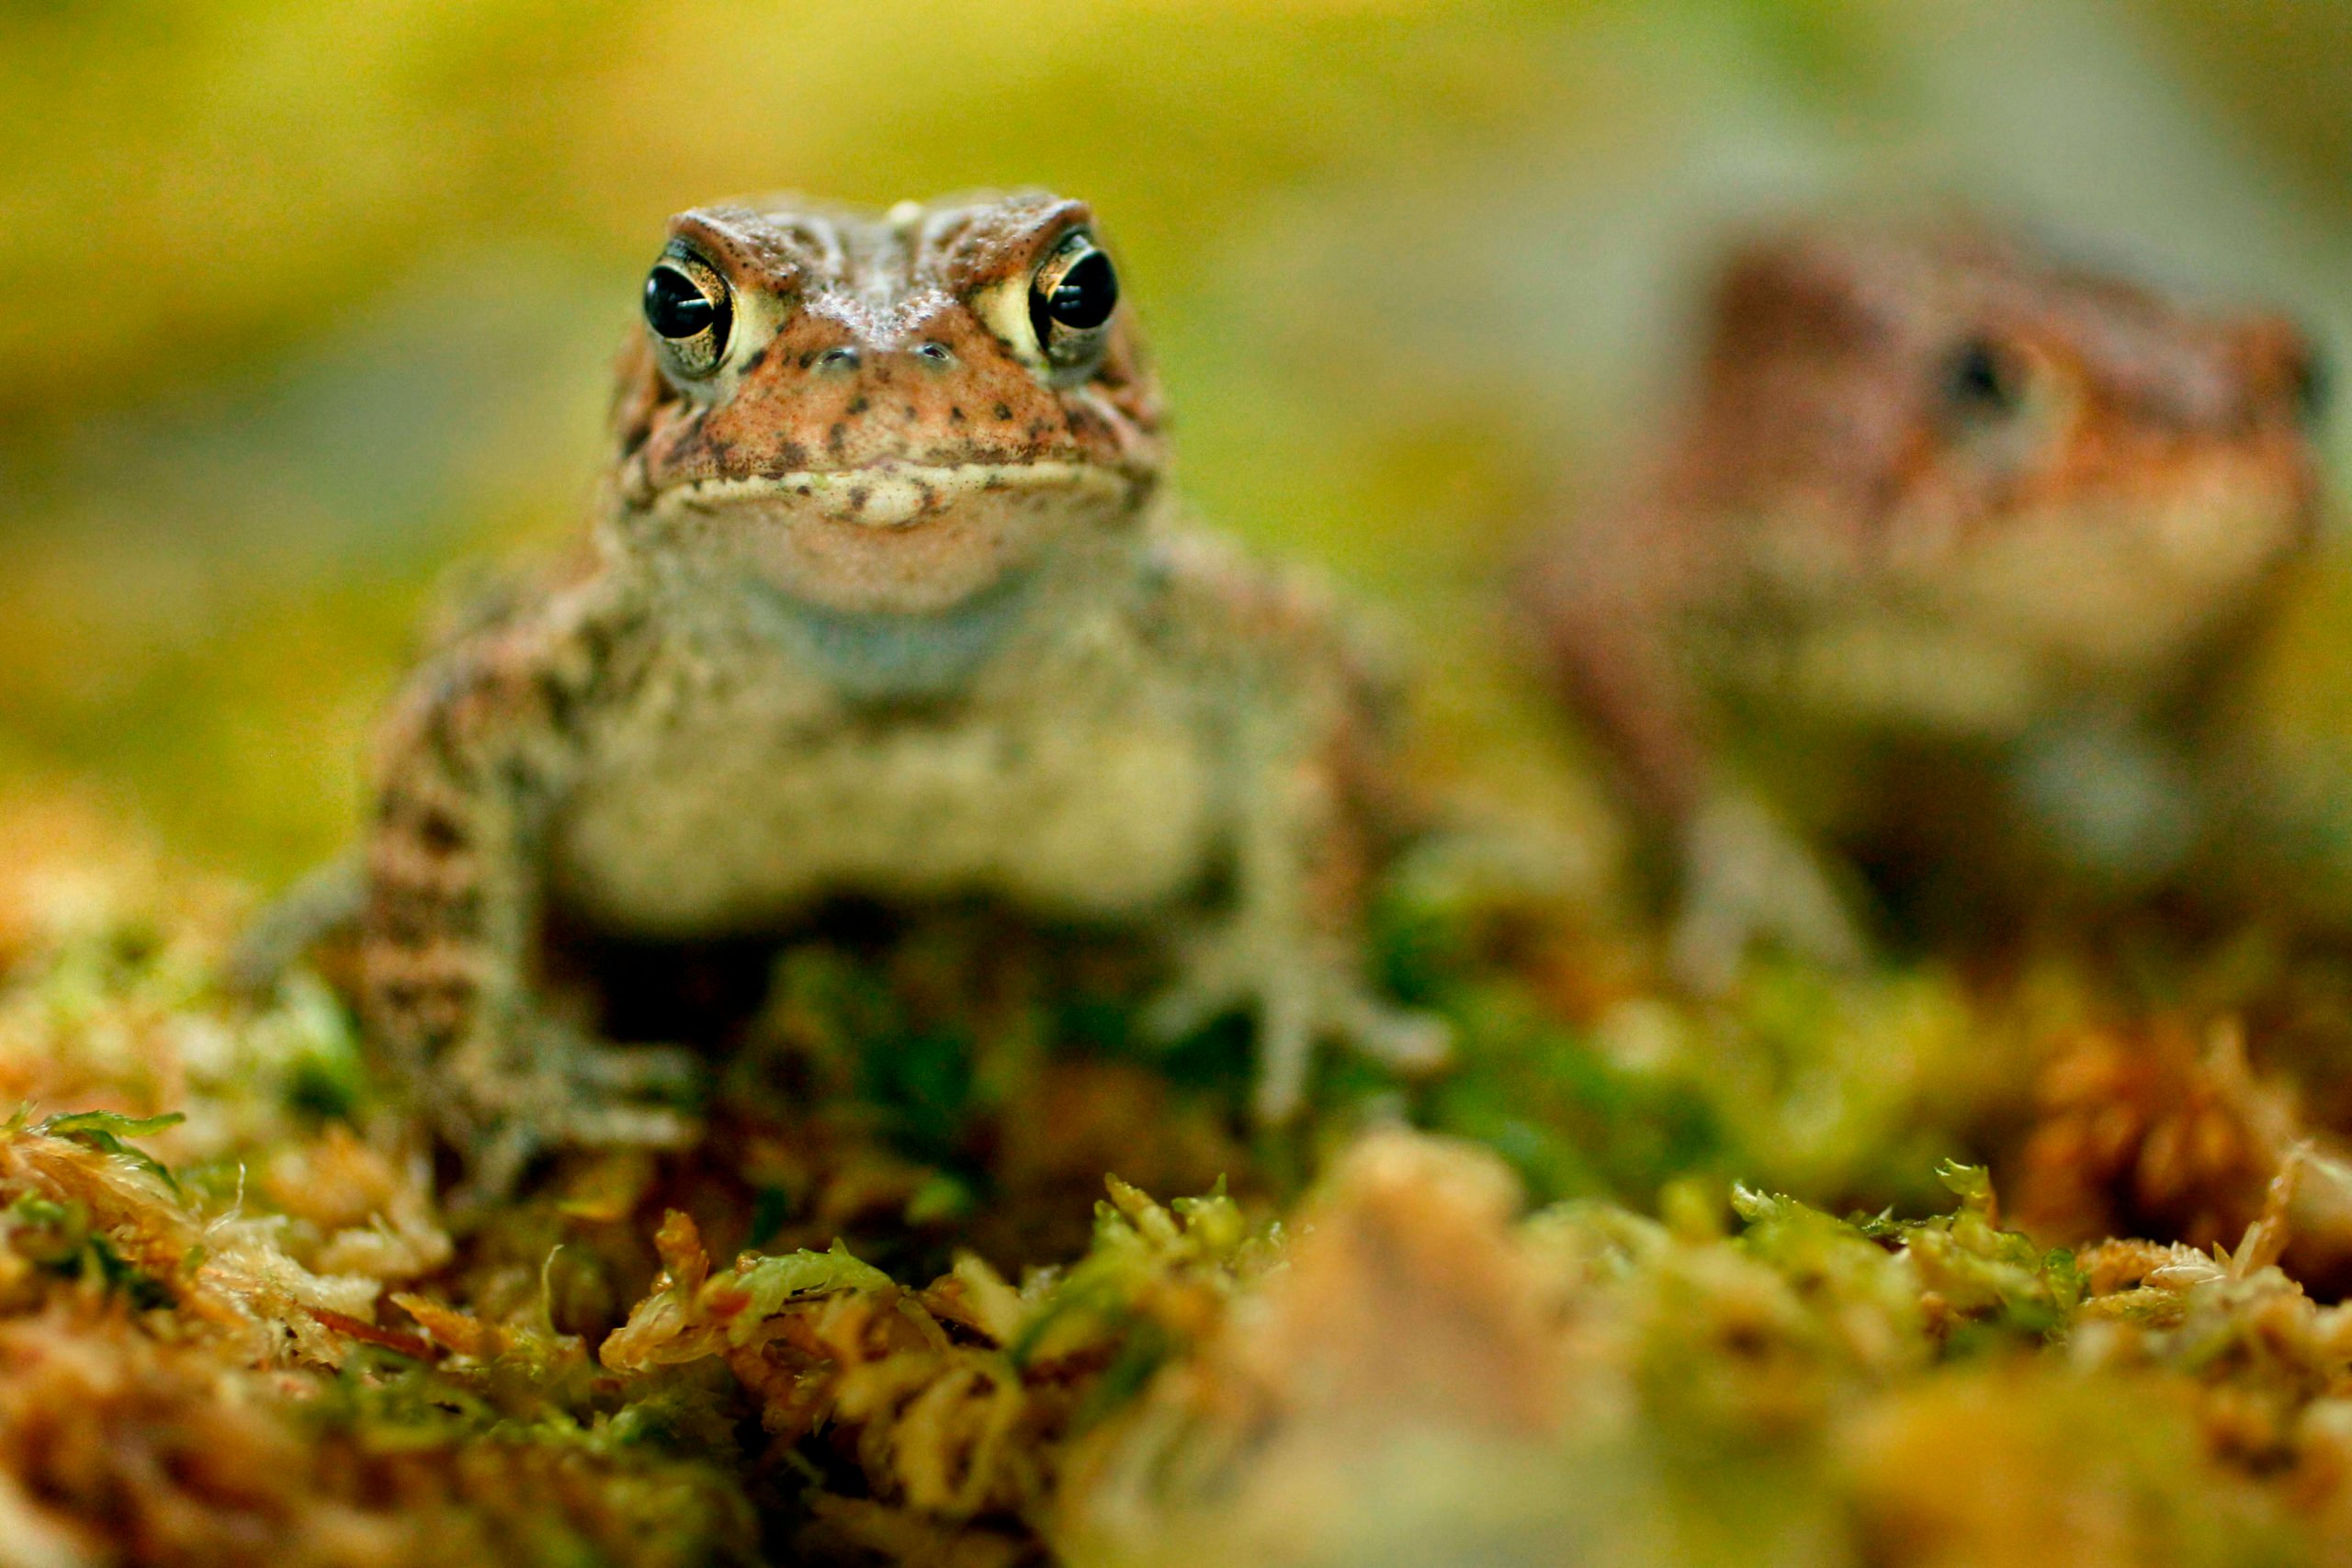 A close-up of a pair of Houston toads, one more sharply in focus. The toads are living on an organic looking medium. They have spots along their brownish red faces and stripes down their front legs.